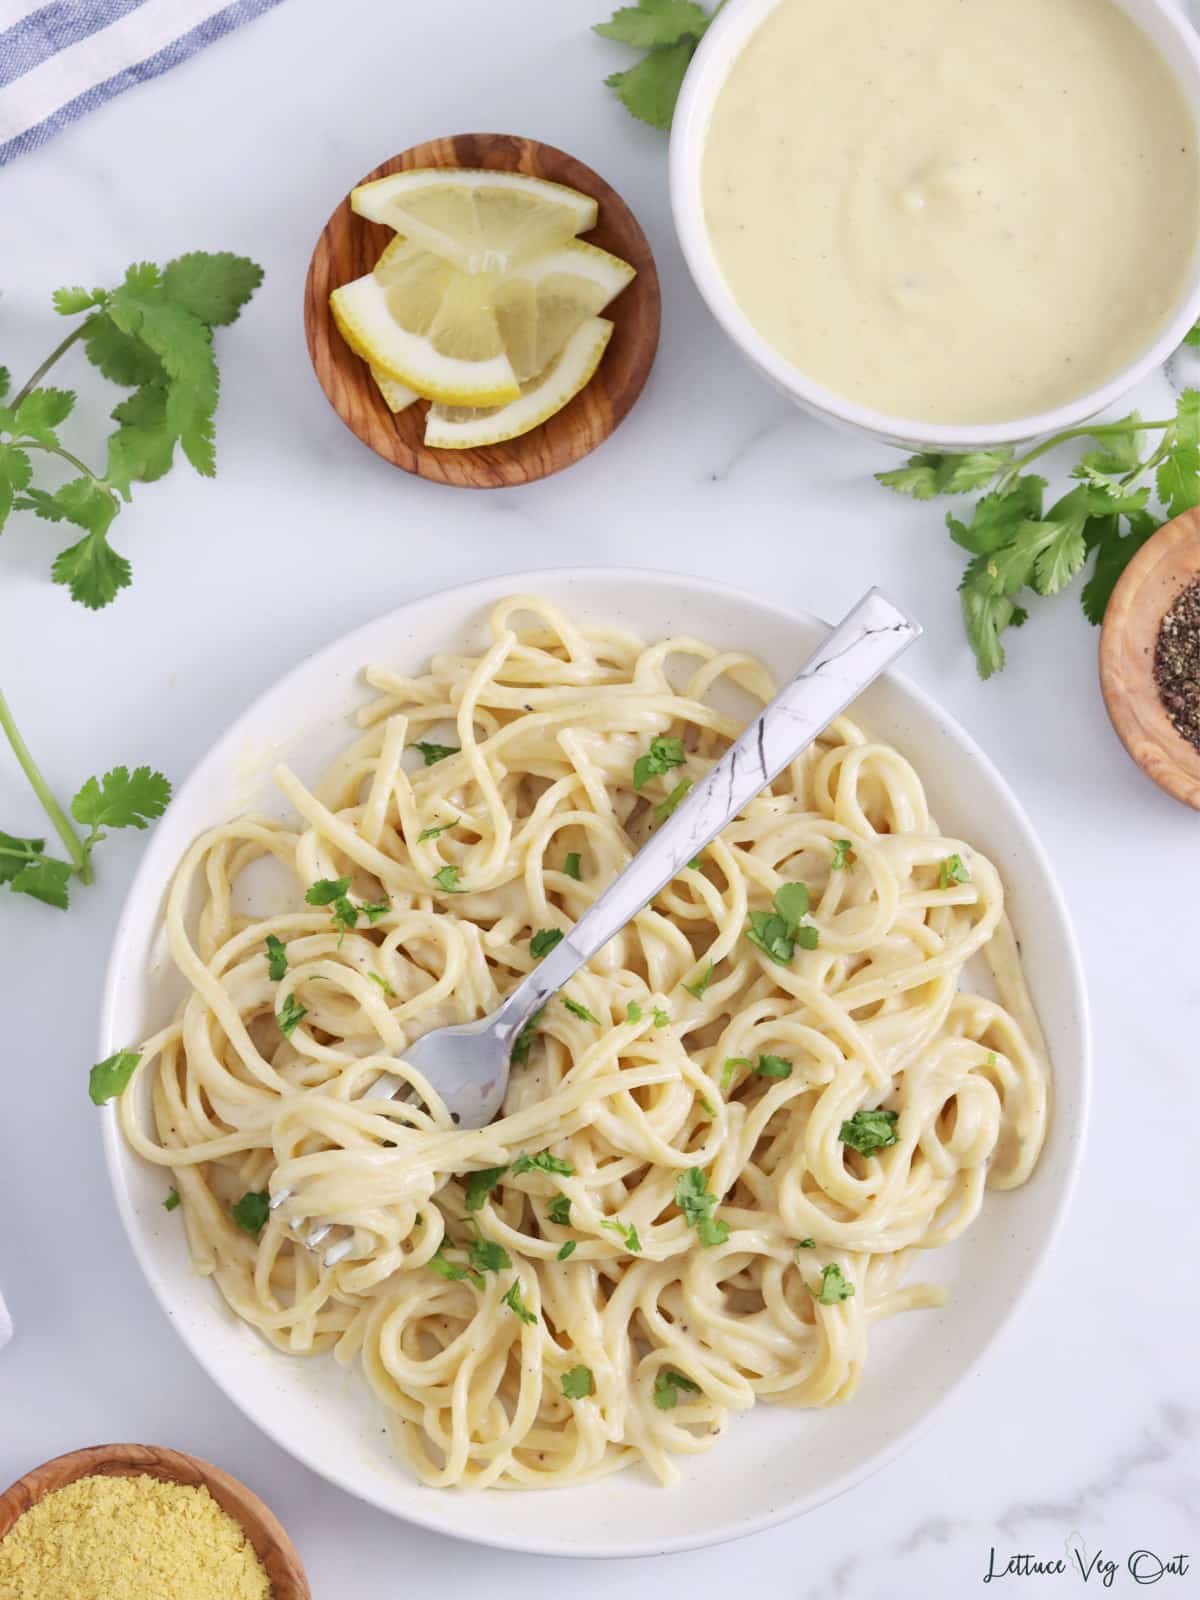 Plate of pasta tossed in white sauce garnished with chopped parsley with lemon slices and a bowl of bechamel sauce.